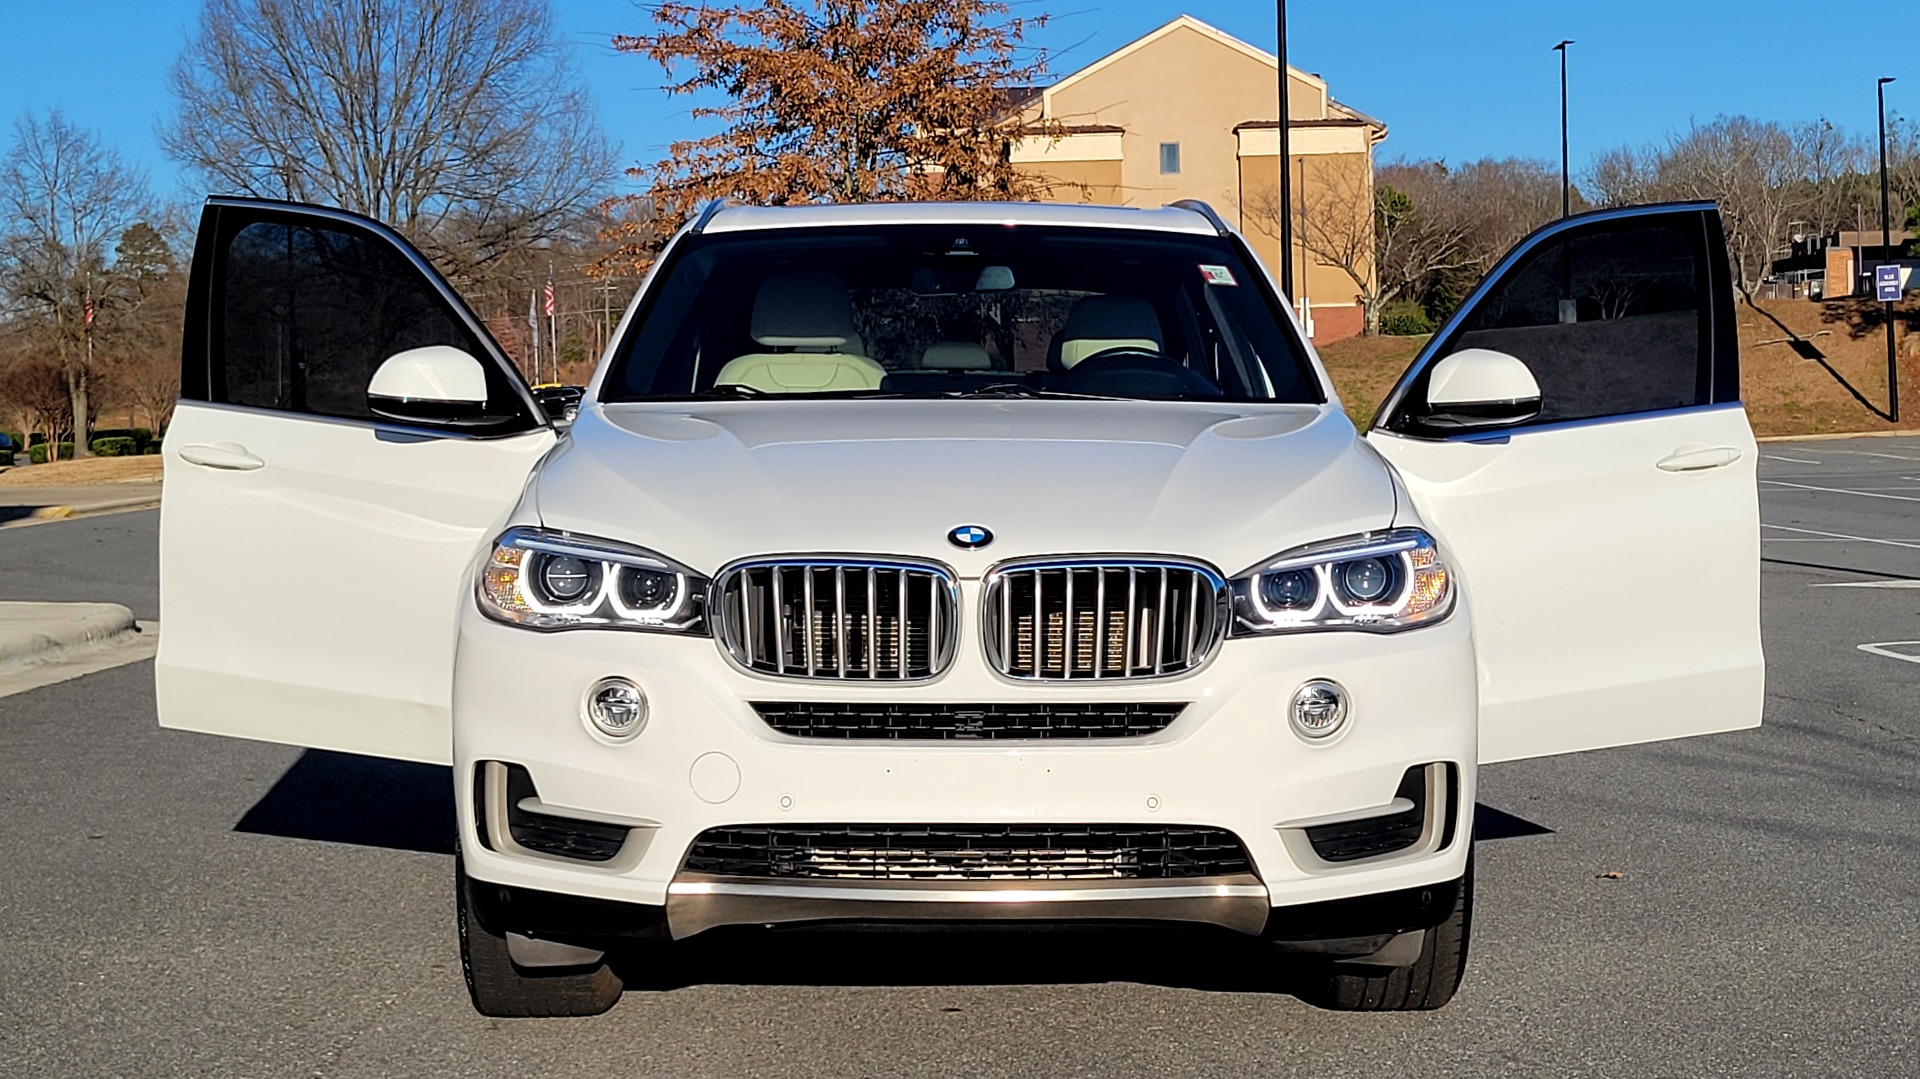 Used 2018 BMW X5 XDRIVE35I PREMIUM / DRVR ASST / HUD / WIRELESS CHARGING / HEATED SEATS for sale Sold at Formula Imports in Charlotte NC 28227 22